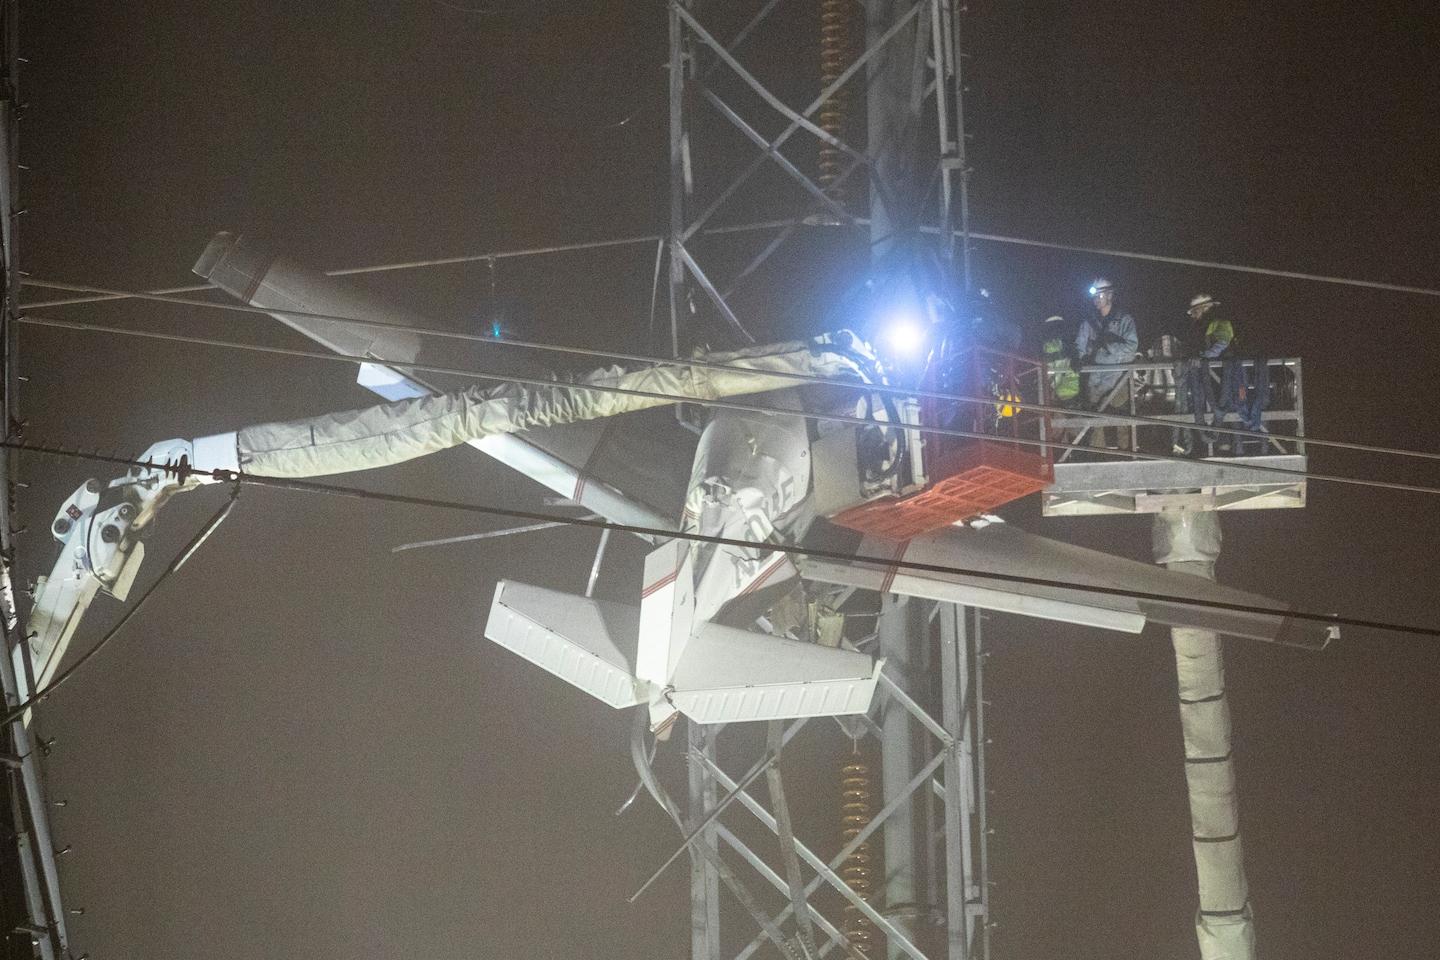 Thumbnail of Pilot, passenger rescued after plane gets tangled in high-voltage lines in Maryland